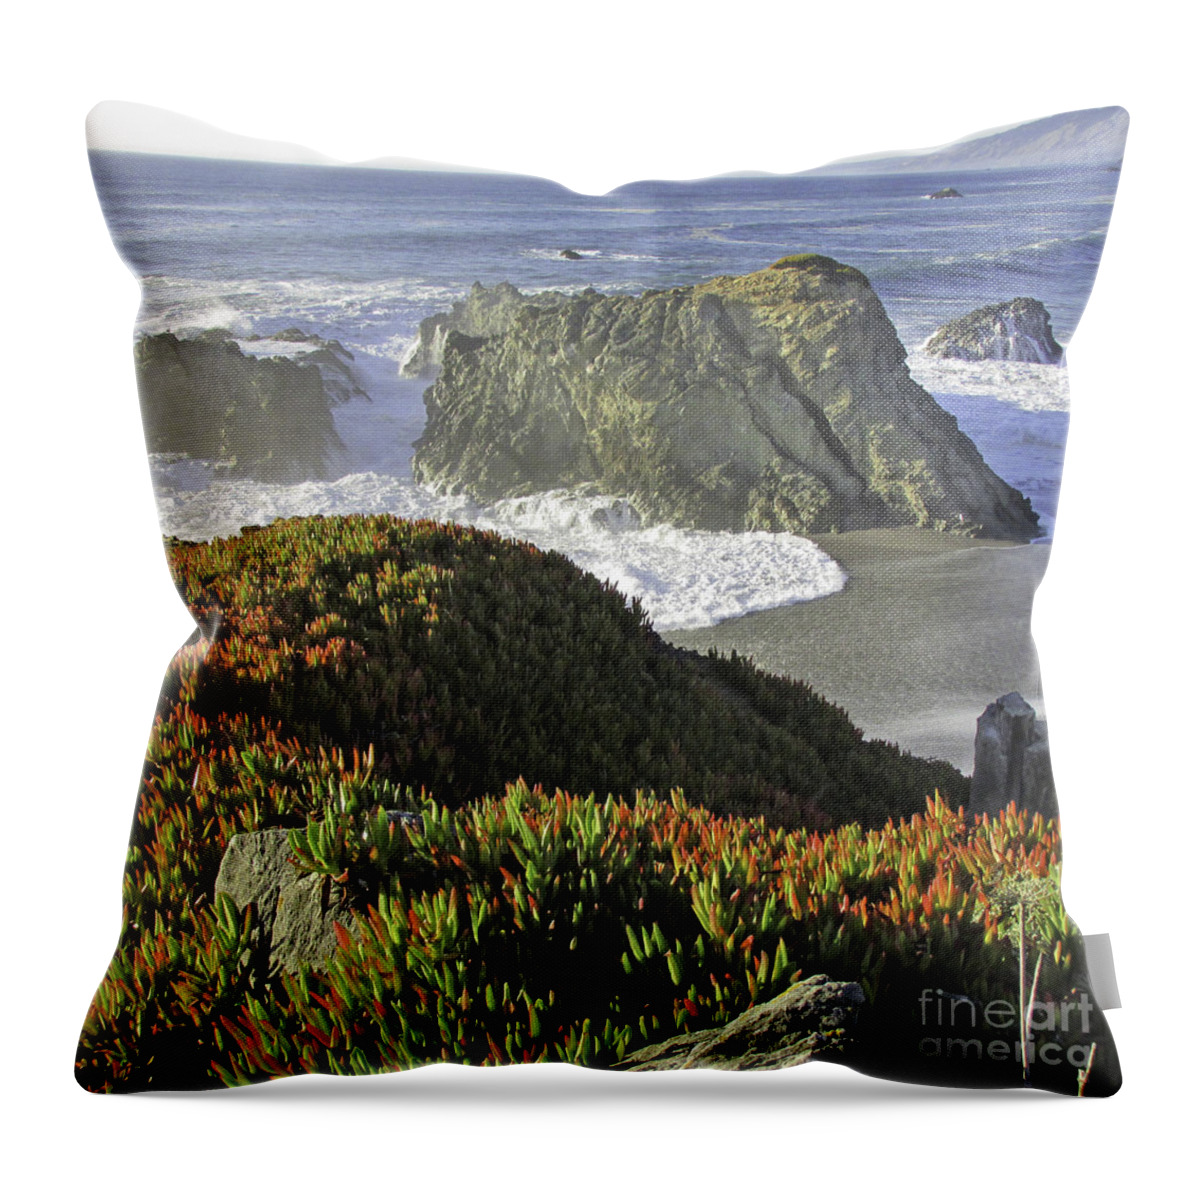 Ocean Throw Pillow featuring the photograph By the Sea by Joyce Creswell